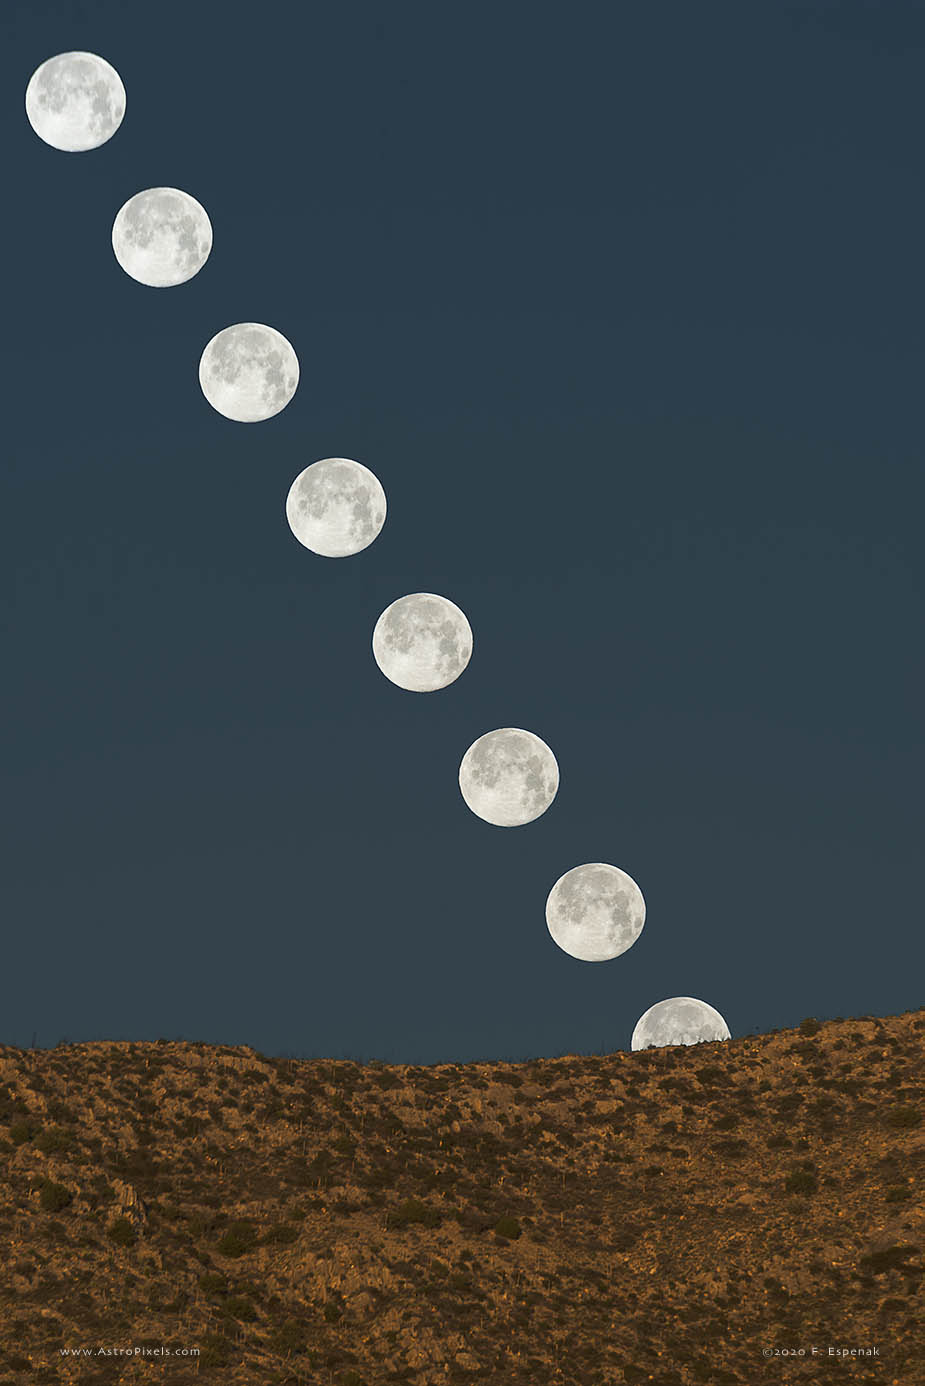 Moonset Sequence Over Limestone Mountain - 2